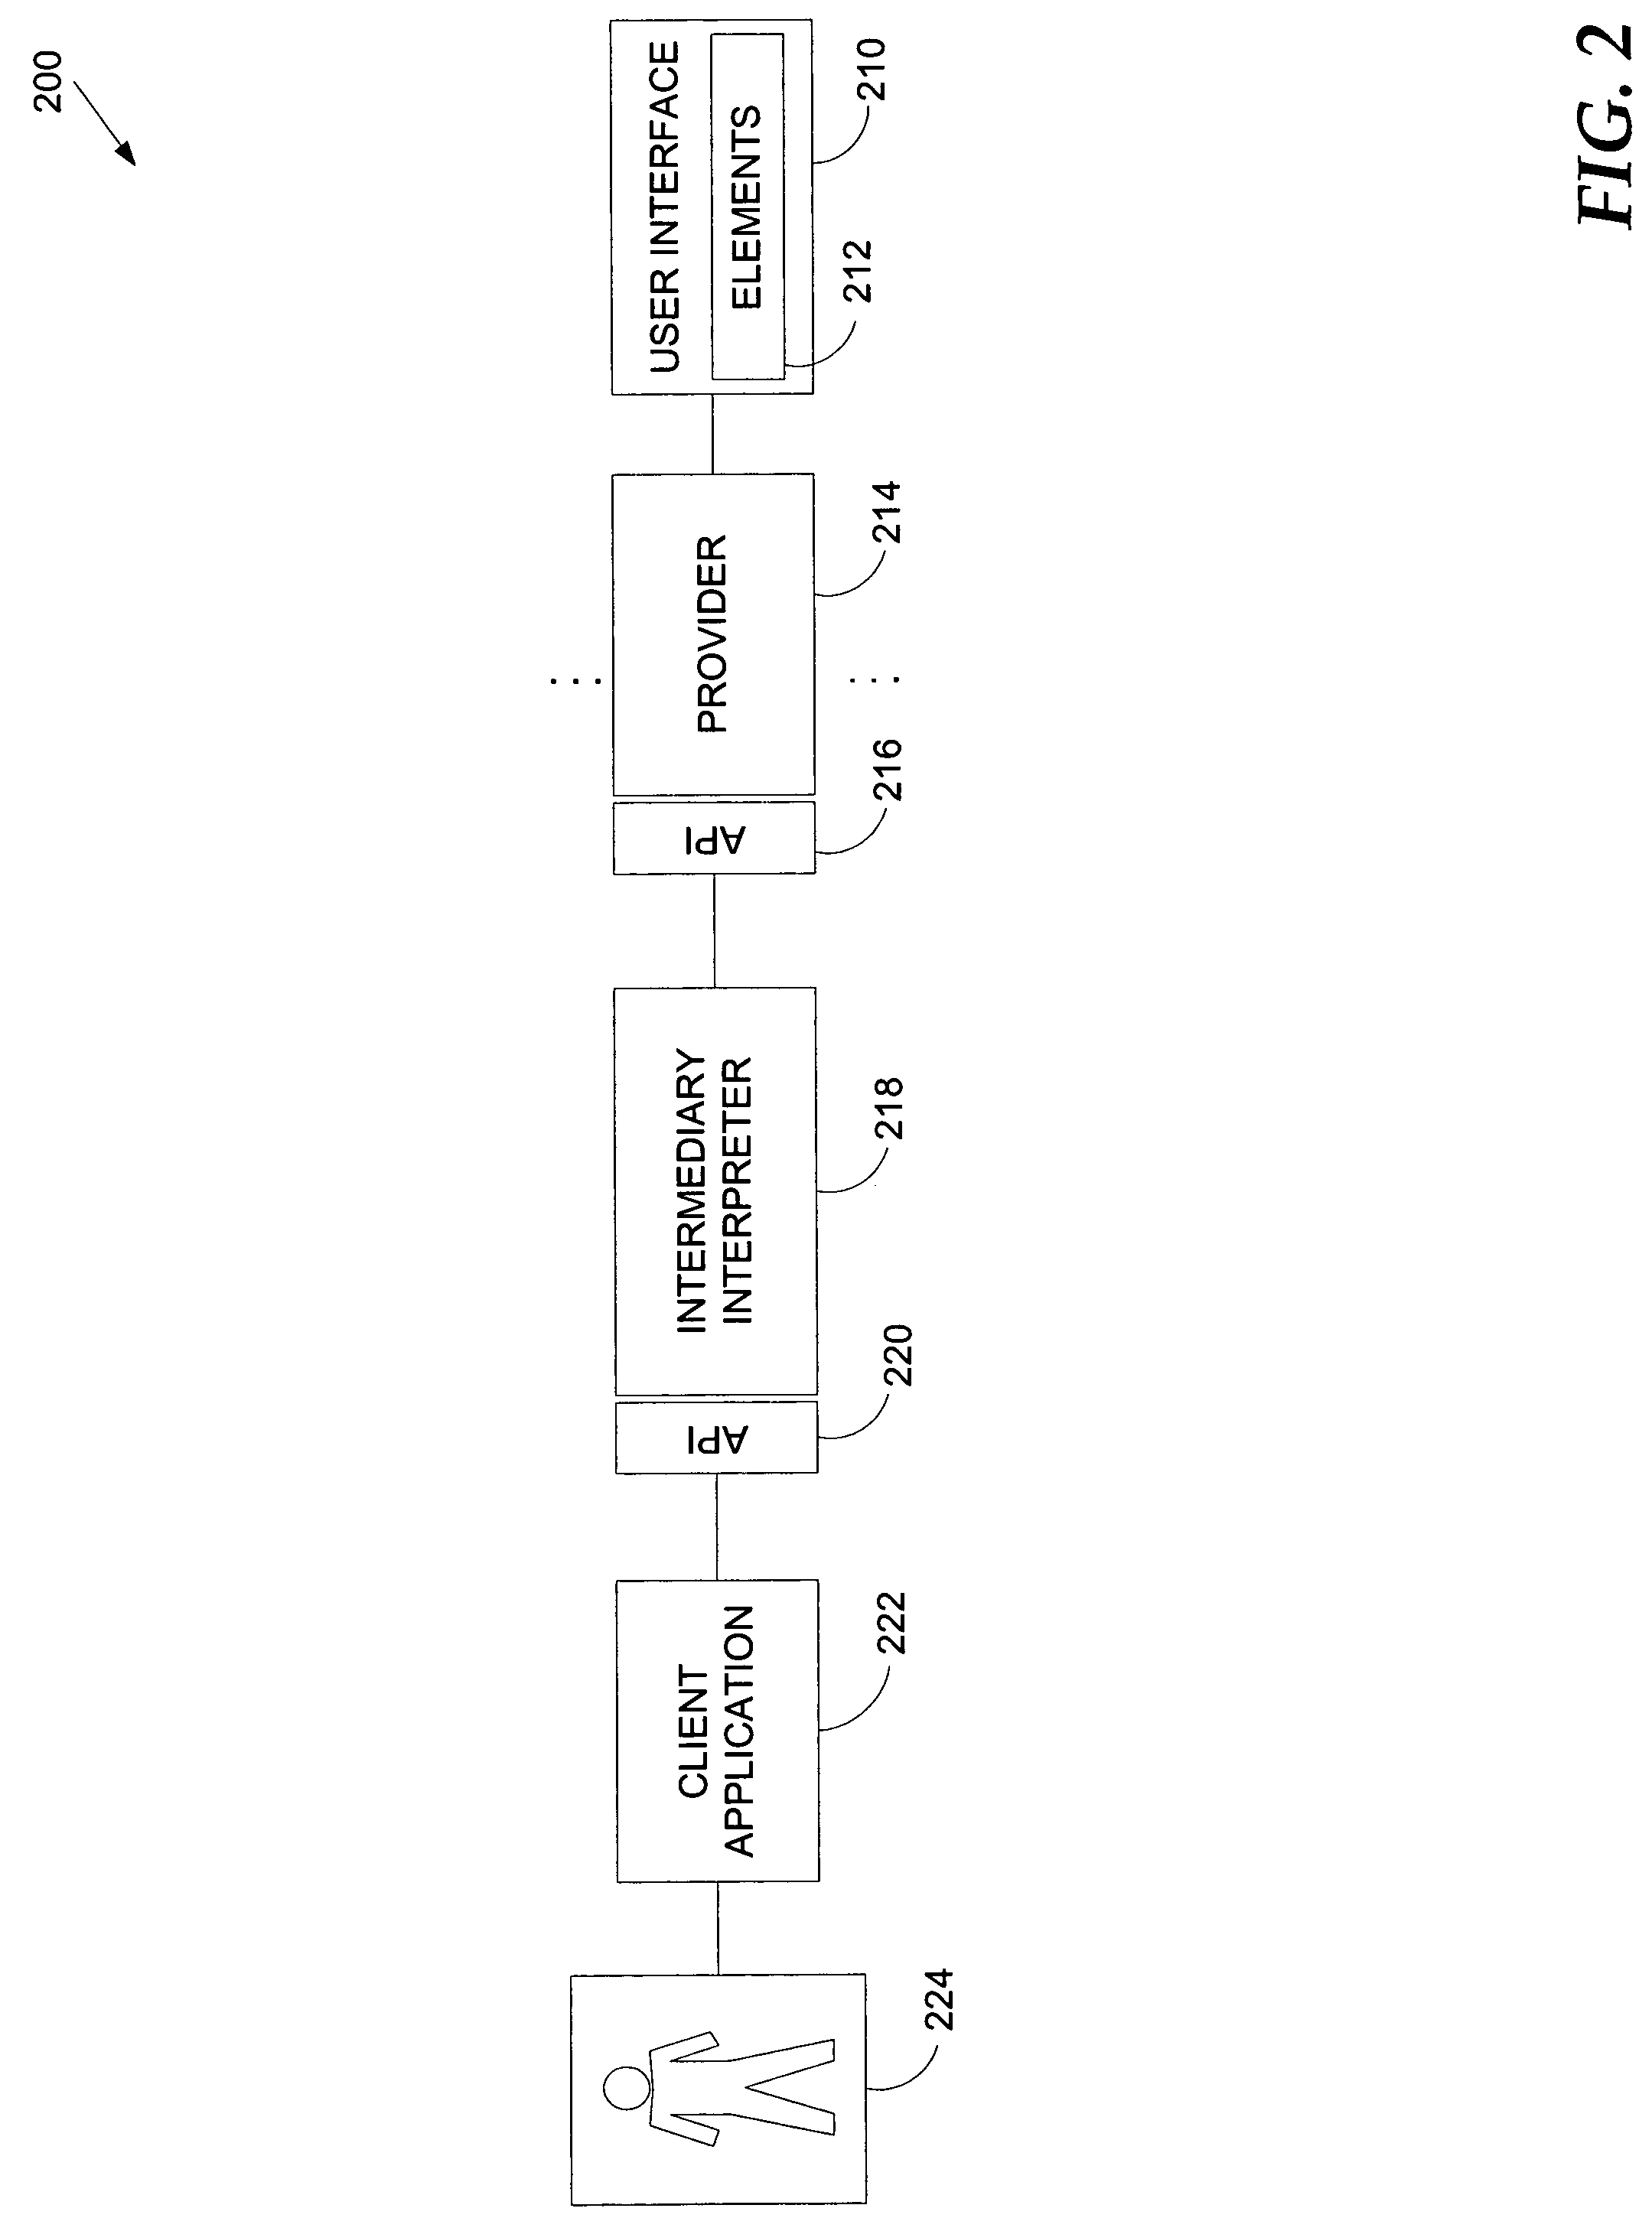 Method and system for representing hierarchal structures of a user-interface